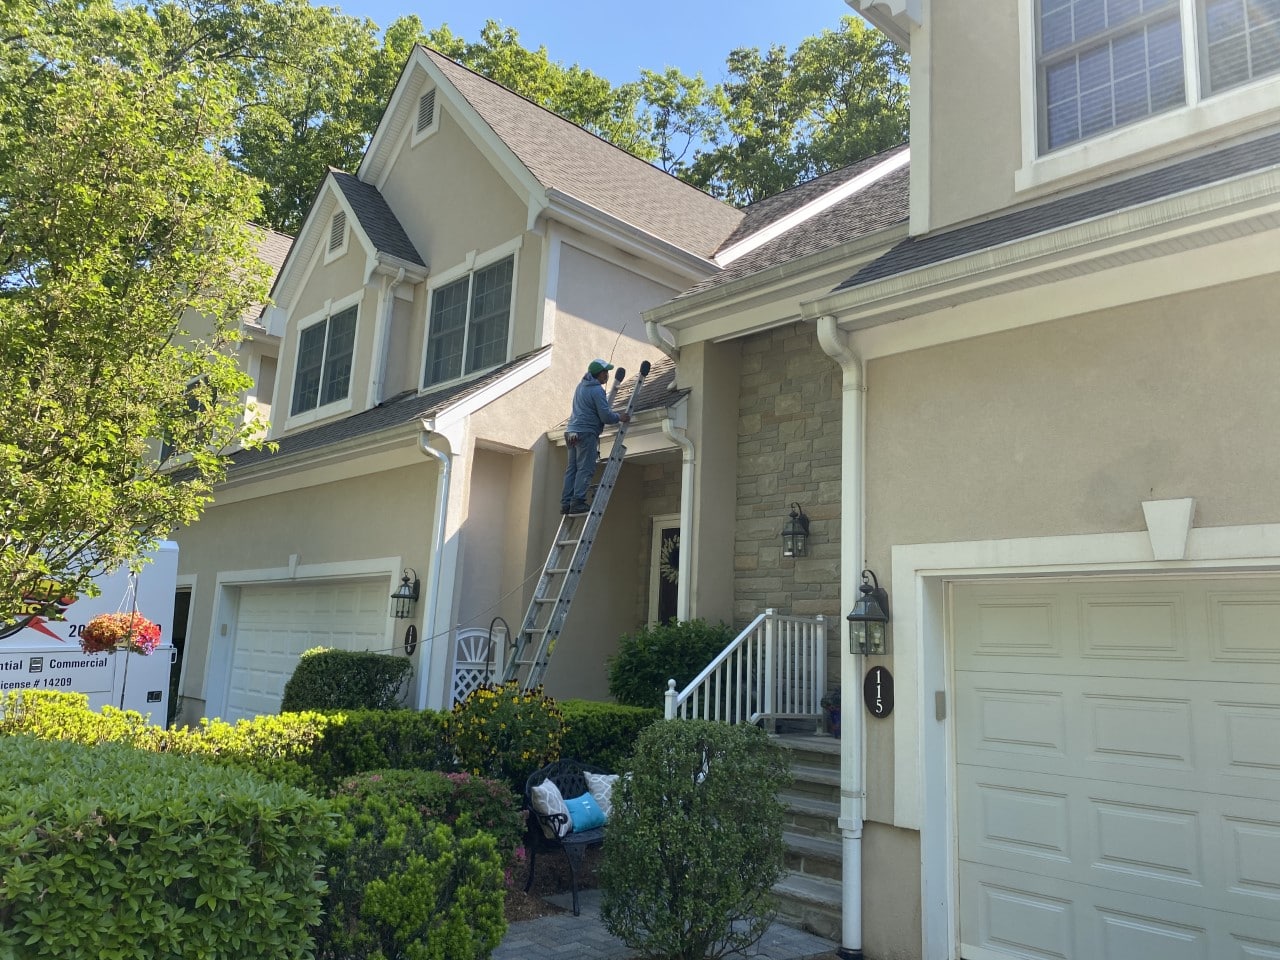 Gutter Cleaning at a Condo Complex in Montvale NJ by Superior Gutters